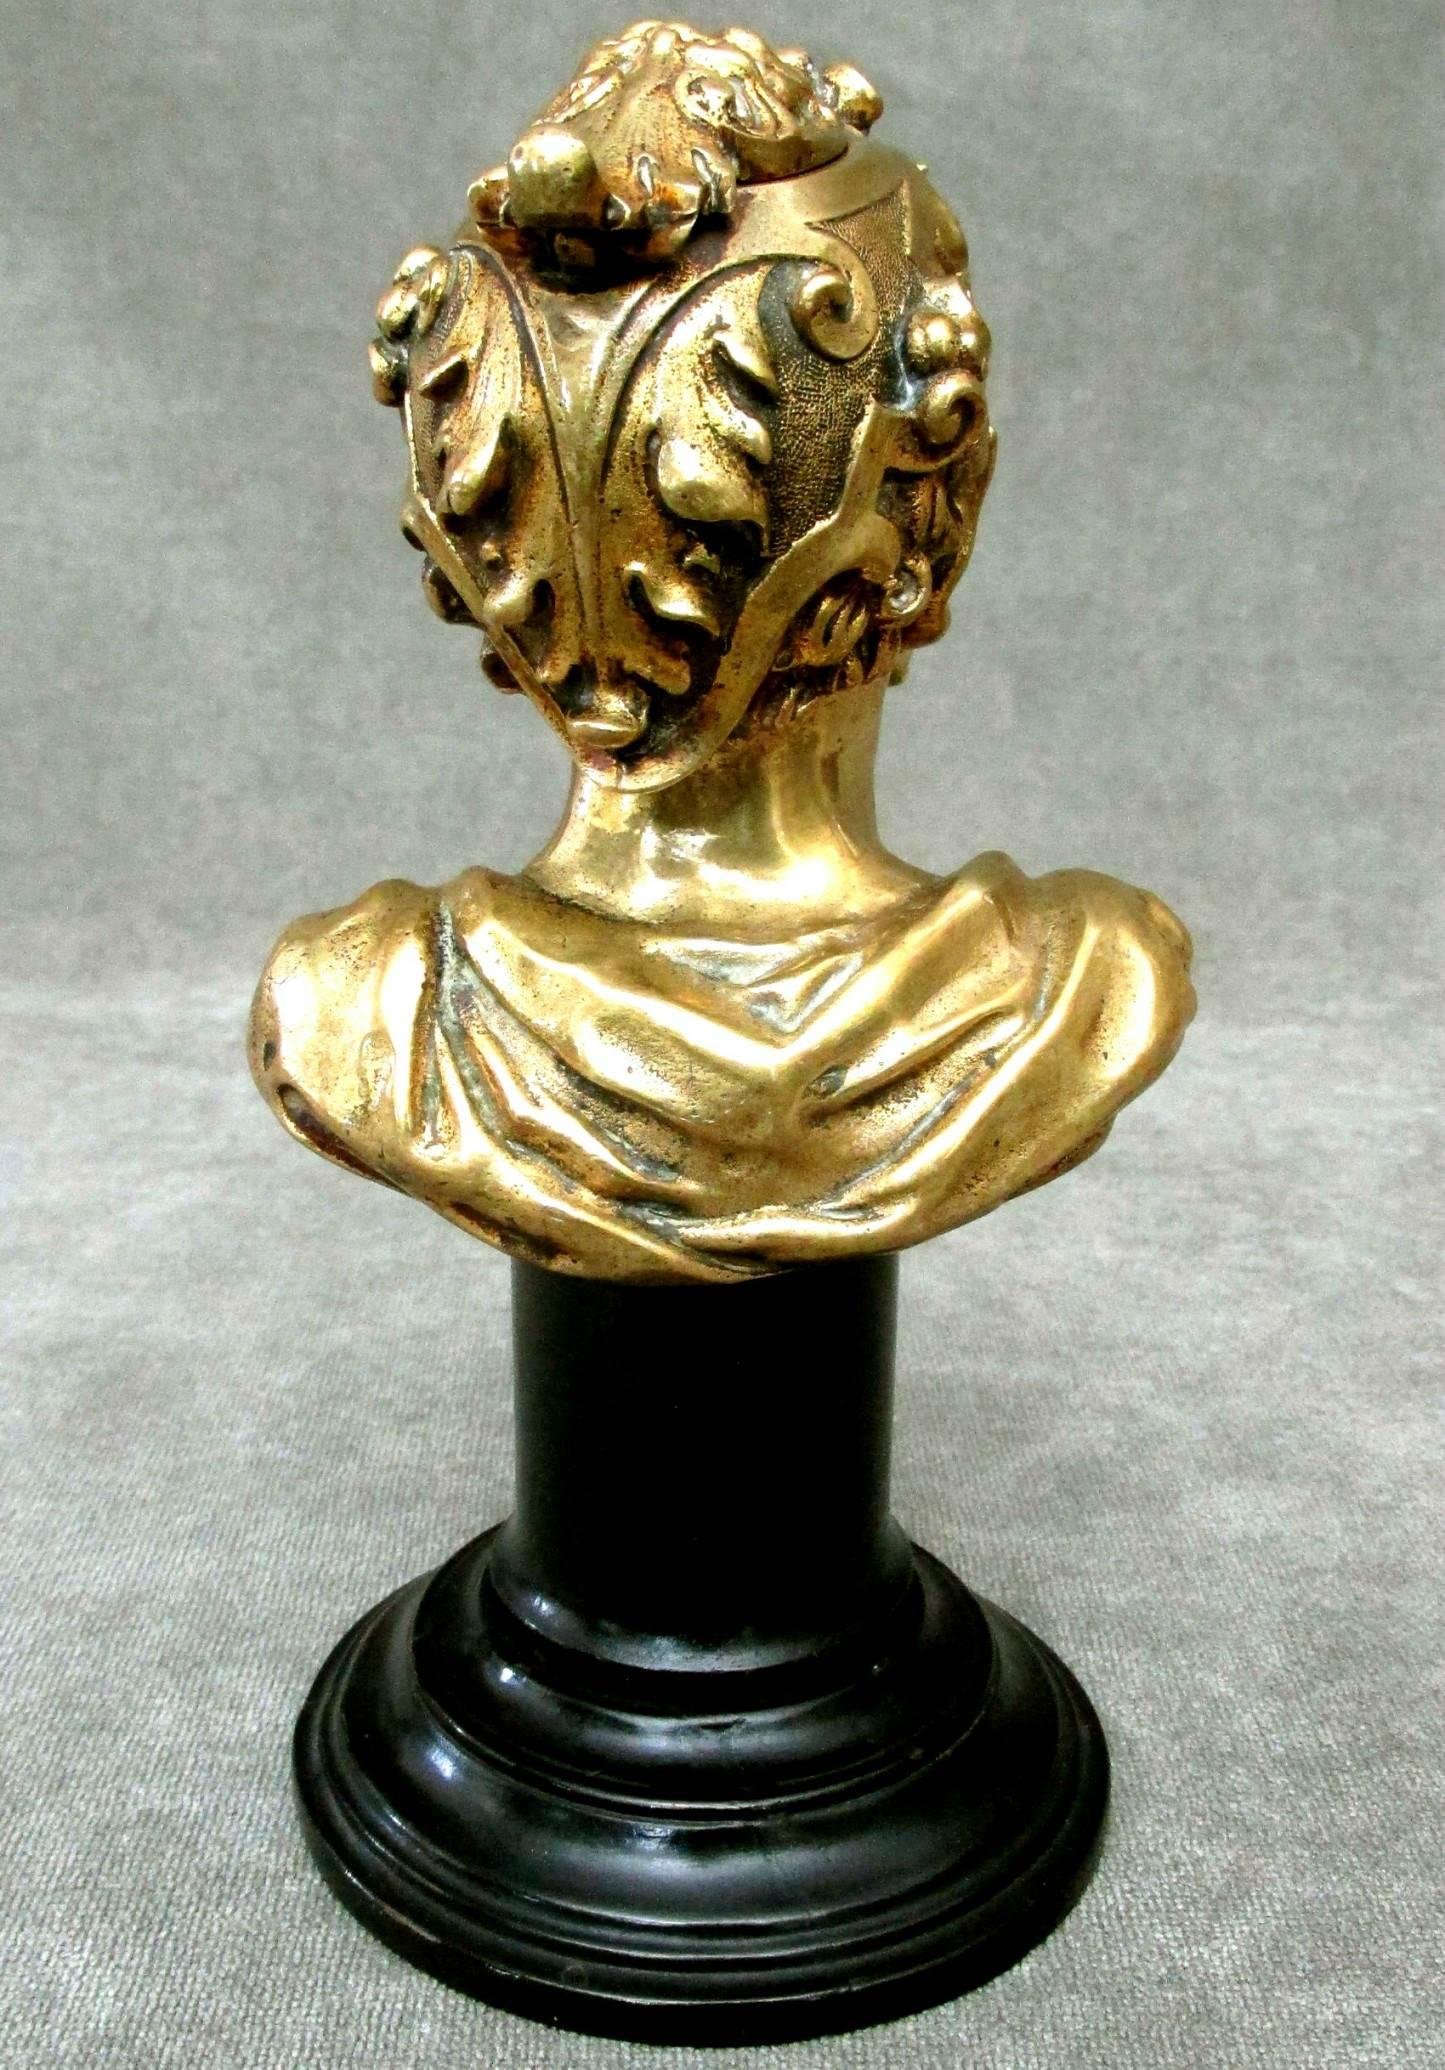 European 19th Century Gilt Bronze Tabletop Cigar Lighter in the Form of a Satyr